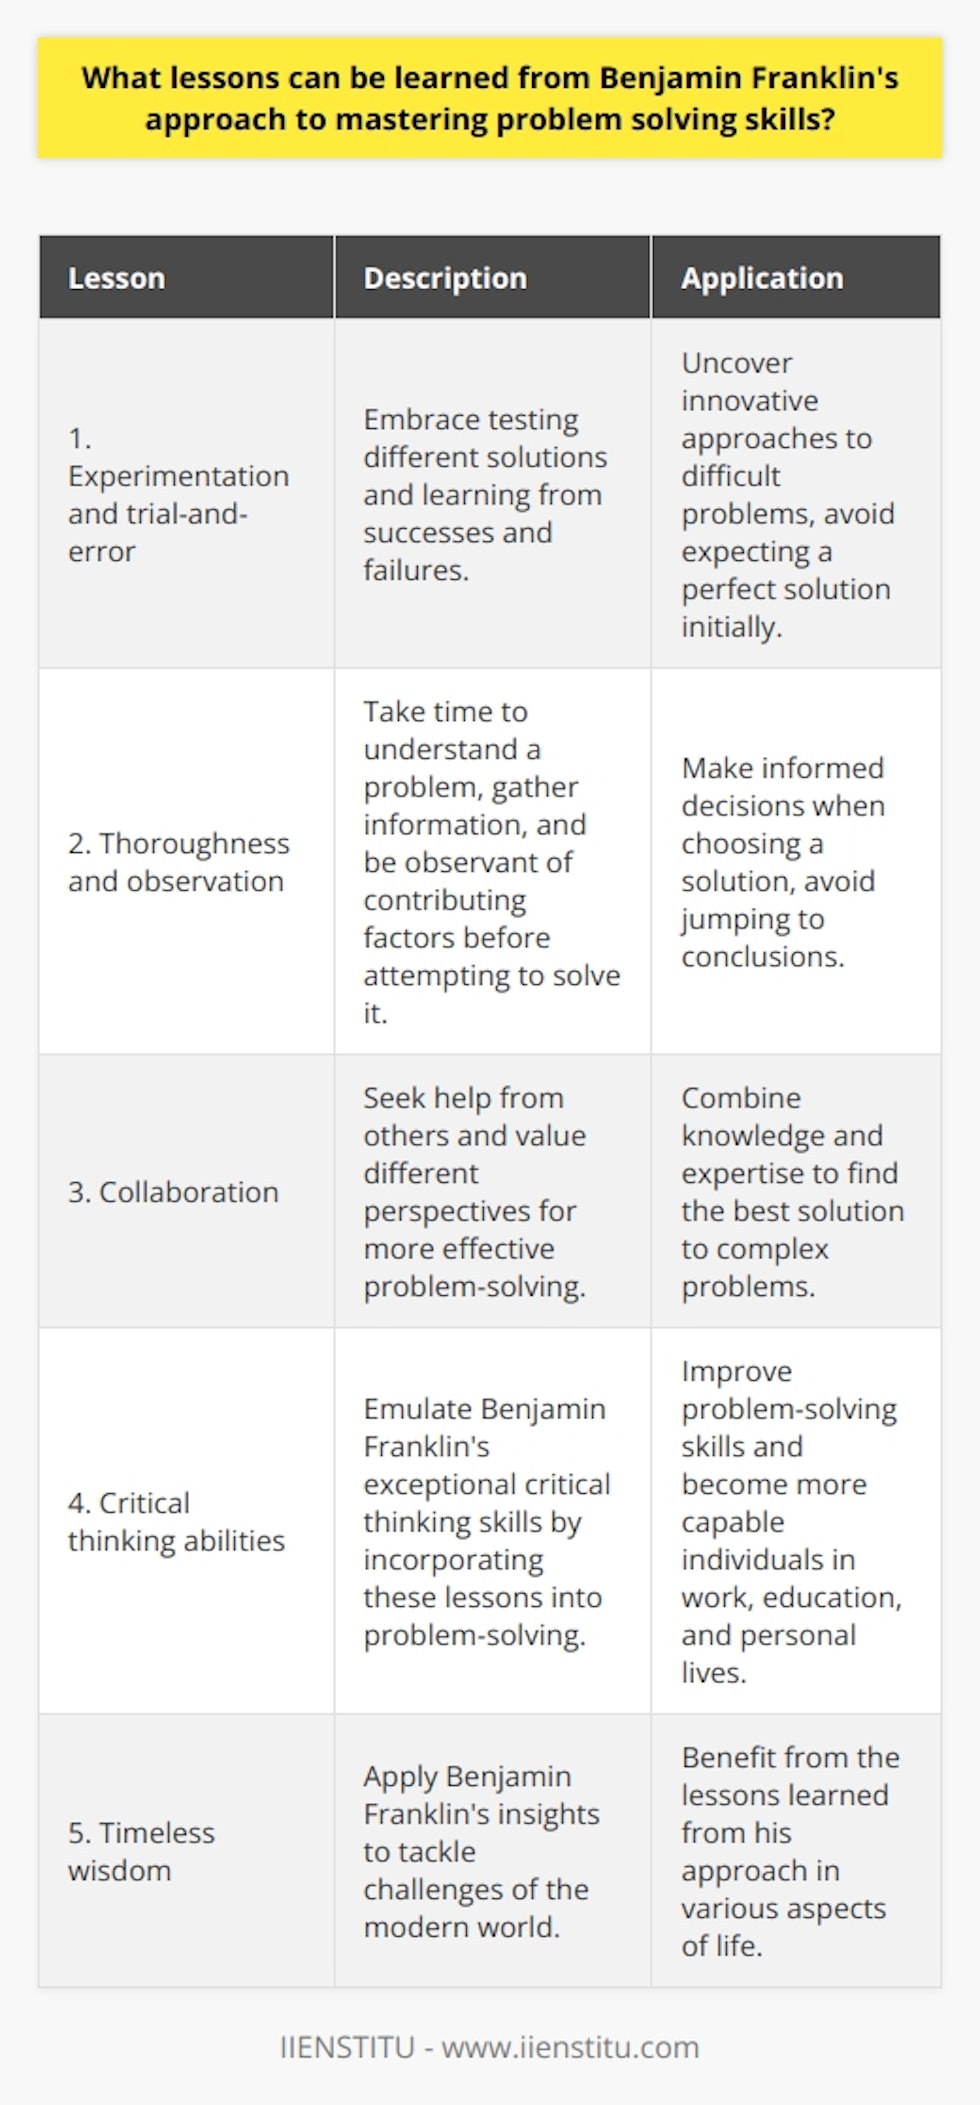 So, to summarize the key lessons we can learn from Benjamin Franklin's approach to problem-solving:1. Experimentation and trial-and-error: Embrace the process of testing different solutions and learning from both successes and failures, rather than hoping for a perfect solution from the outset. This mindset can help us uncover innovative approaches to difficult problems.2. Thoroughness and observation: Before attempting to solve a problem, take the time to thoroughly understand it and gather all necessary information. Be observant of the various factors that contribute to the problem and analyze these before jumping to conclusions. This approach enables us to make more informed decisions when choosing a solution.3. Collaboration: Don't be afraid to seek help from others, as different perspectives can lead to more effective problem-solving. By combining the knowledge and expertise of various individuals, we increase our chances of finding the best solution to complex problems.By incorporating these three principles into our problem-solving approach, we can emulate Benjamin Franklin's exceptional critical thinking abilities, leading to more effective and innovative solutions in our daily lives. Implementing these lessons in our work, education, and personal lives can improve our problem-solving skills and make us more capable individuals overall. The timeless wisdom of Benjamin Franklin continues to provide insights that can benefit us all as we tackle the challenges of the modern world.